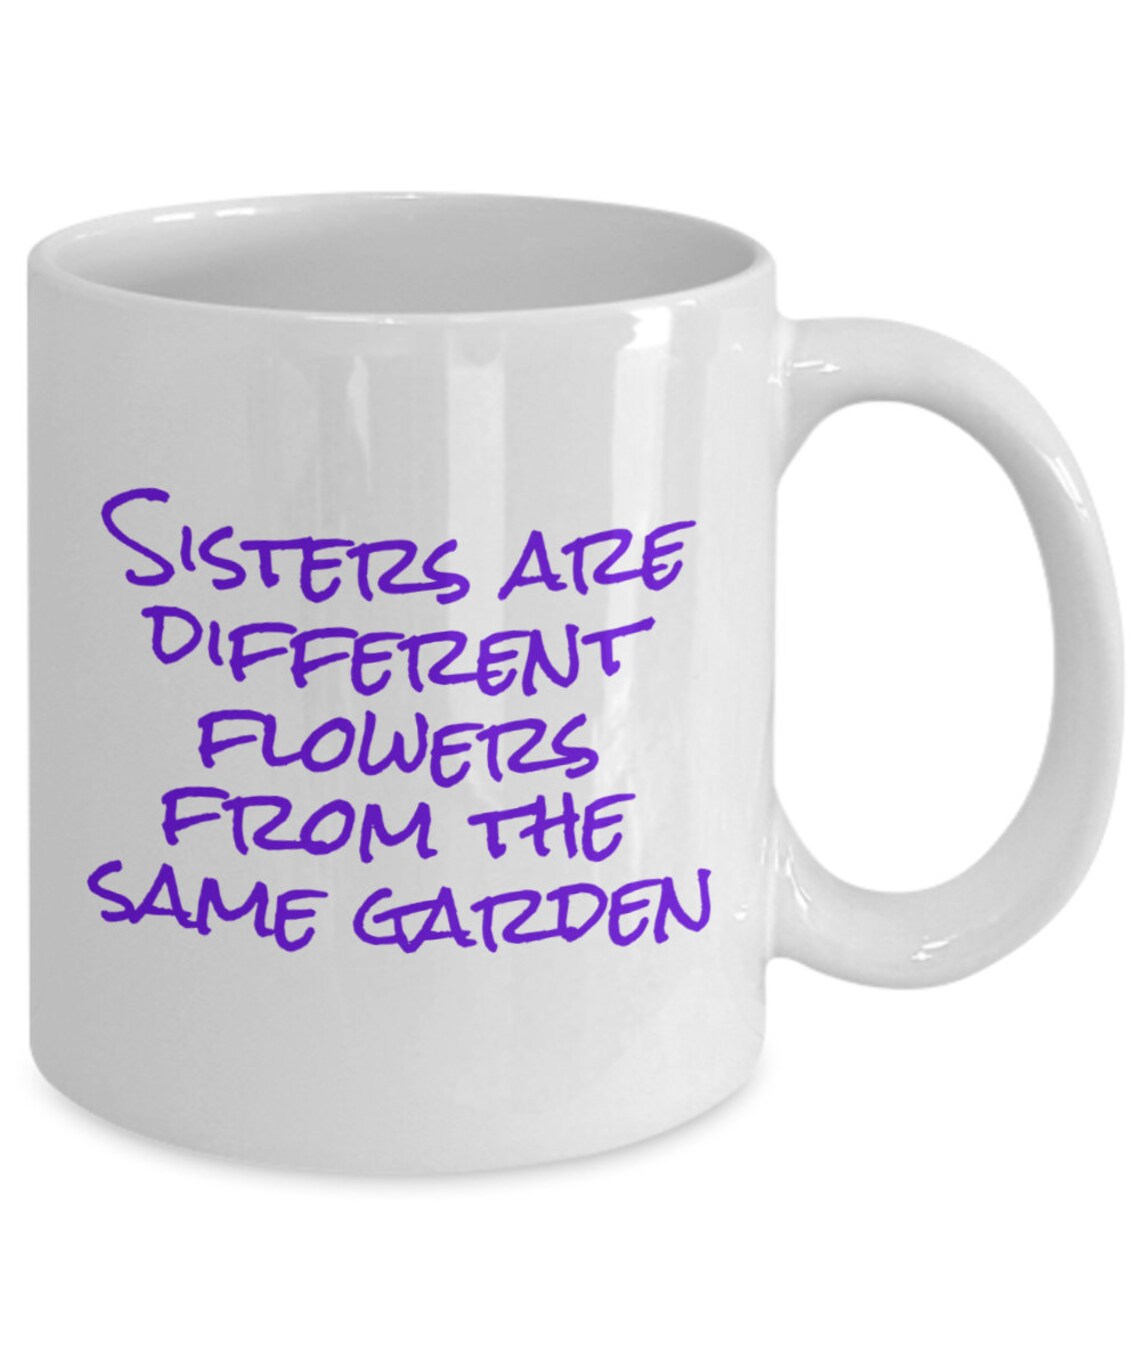 Sisters Are Different Flowers From the Same Garden Awesome | Etsy